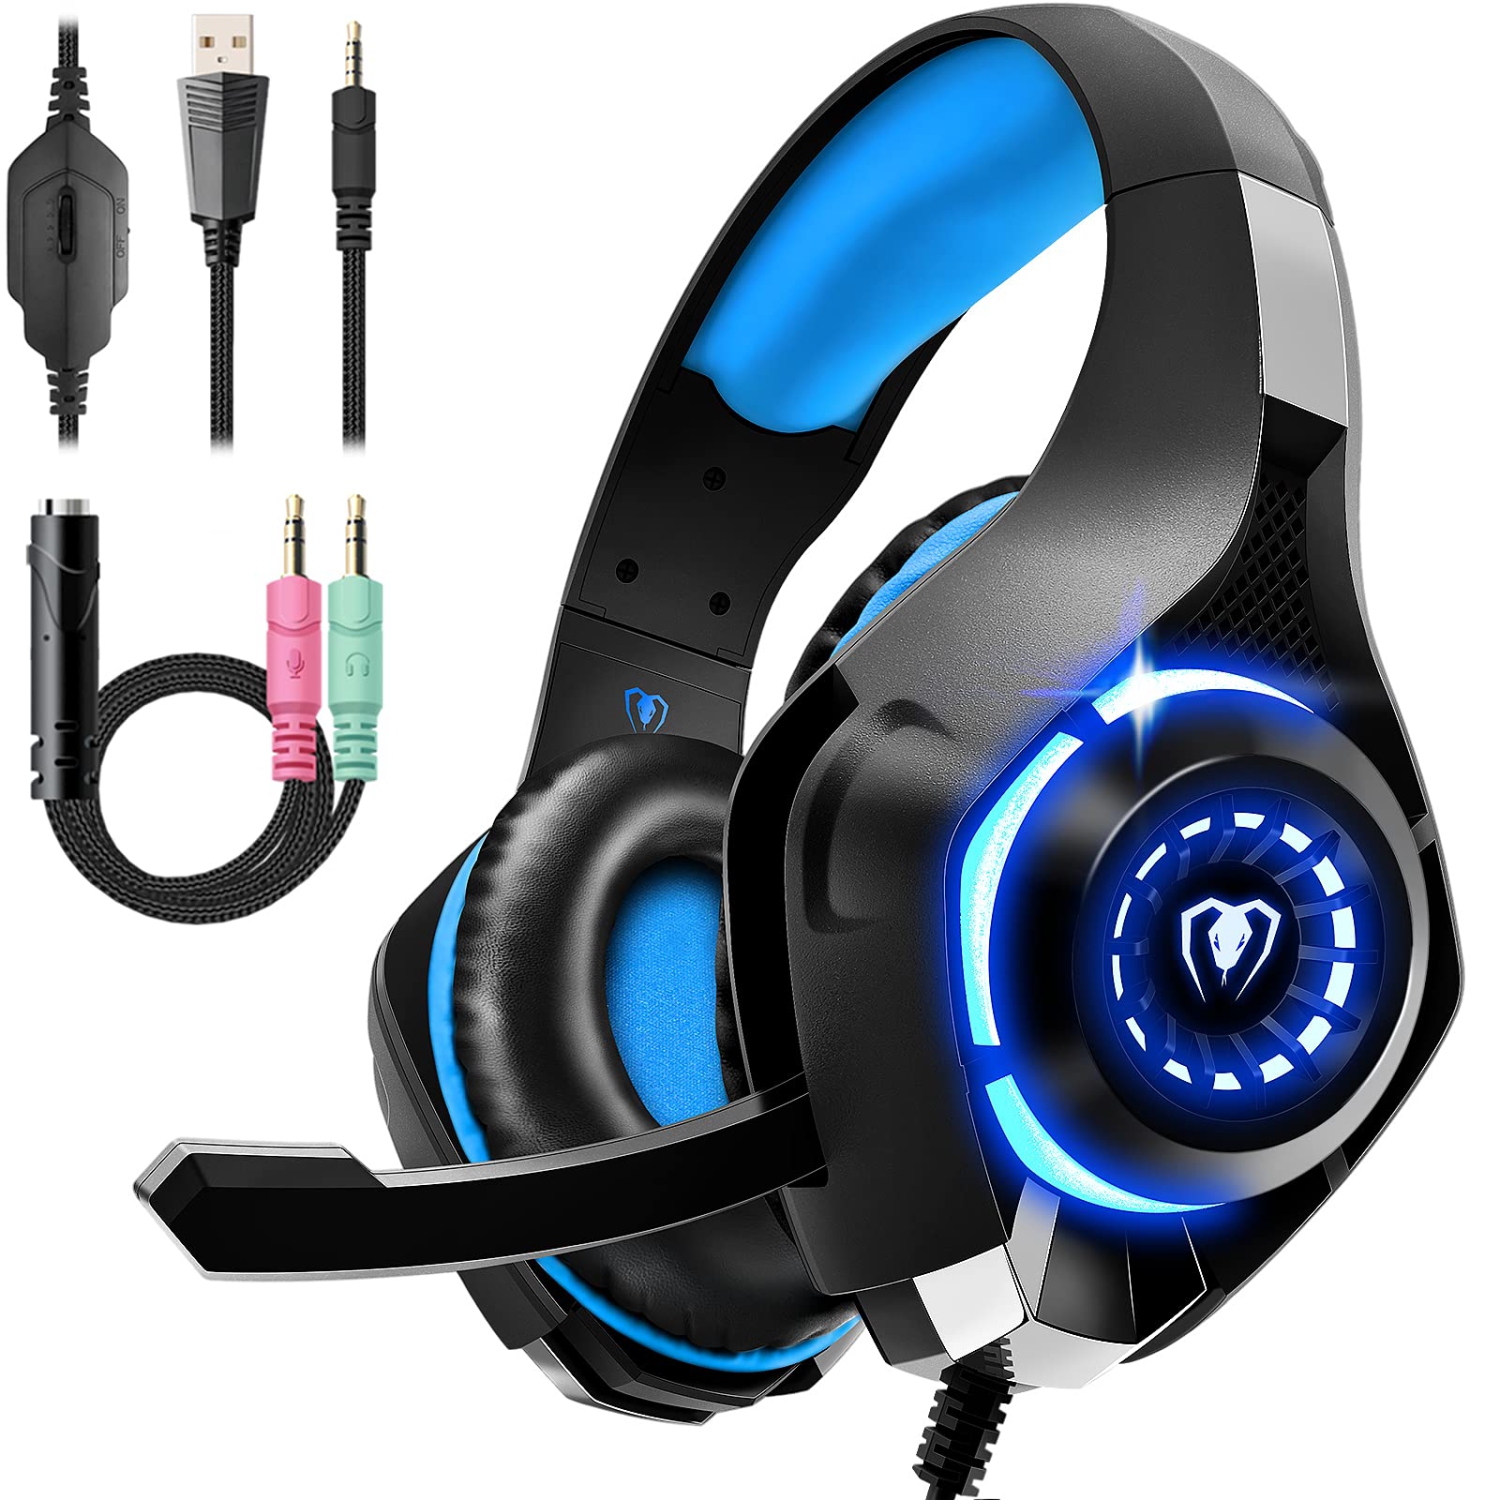 Gaming Headset for PS4 PS5 Xbox One, Over-Ear Gaming Headphones with Noise Reduction Mic Volume Control LED Light for PS5 PS